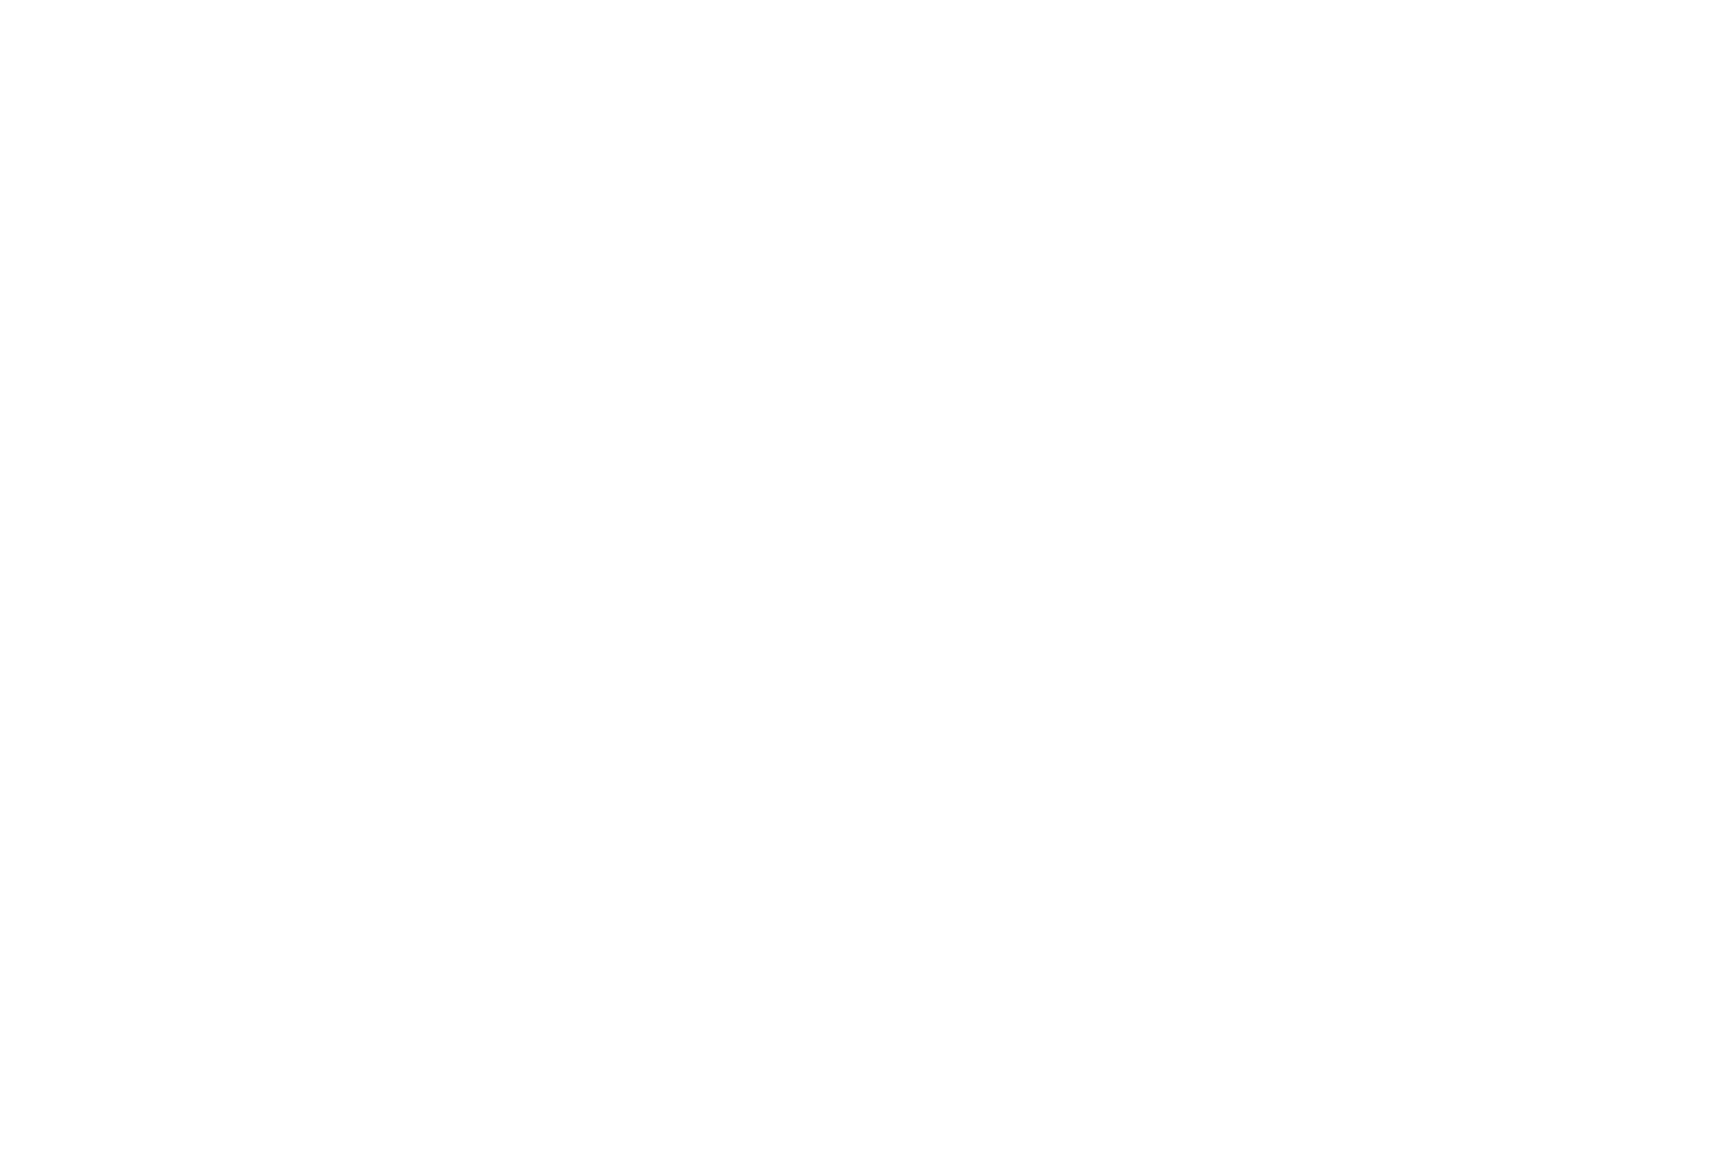 Script - Sea of Art -  Honorable Mention 2022